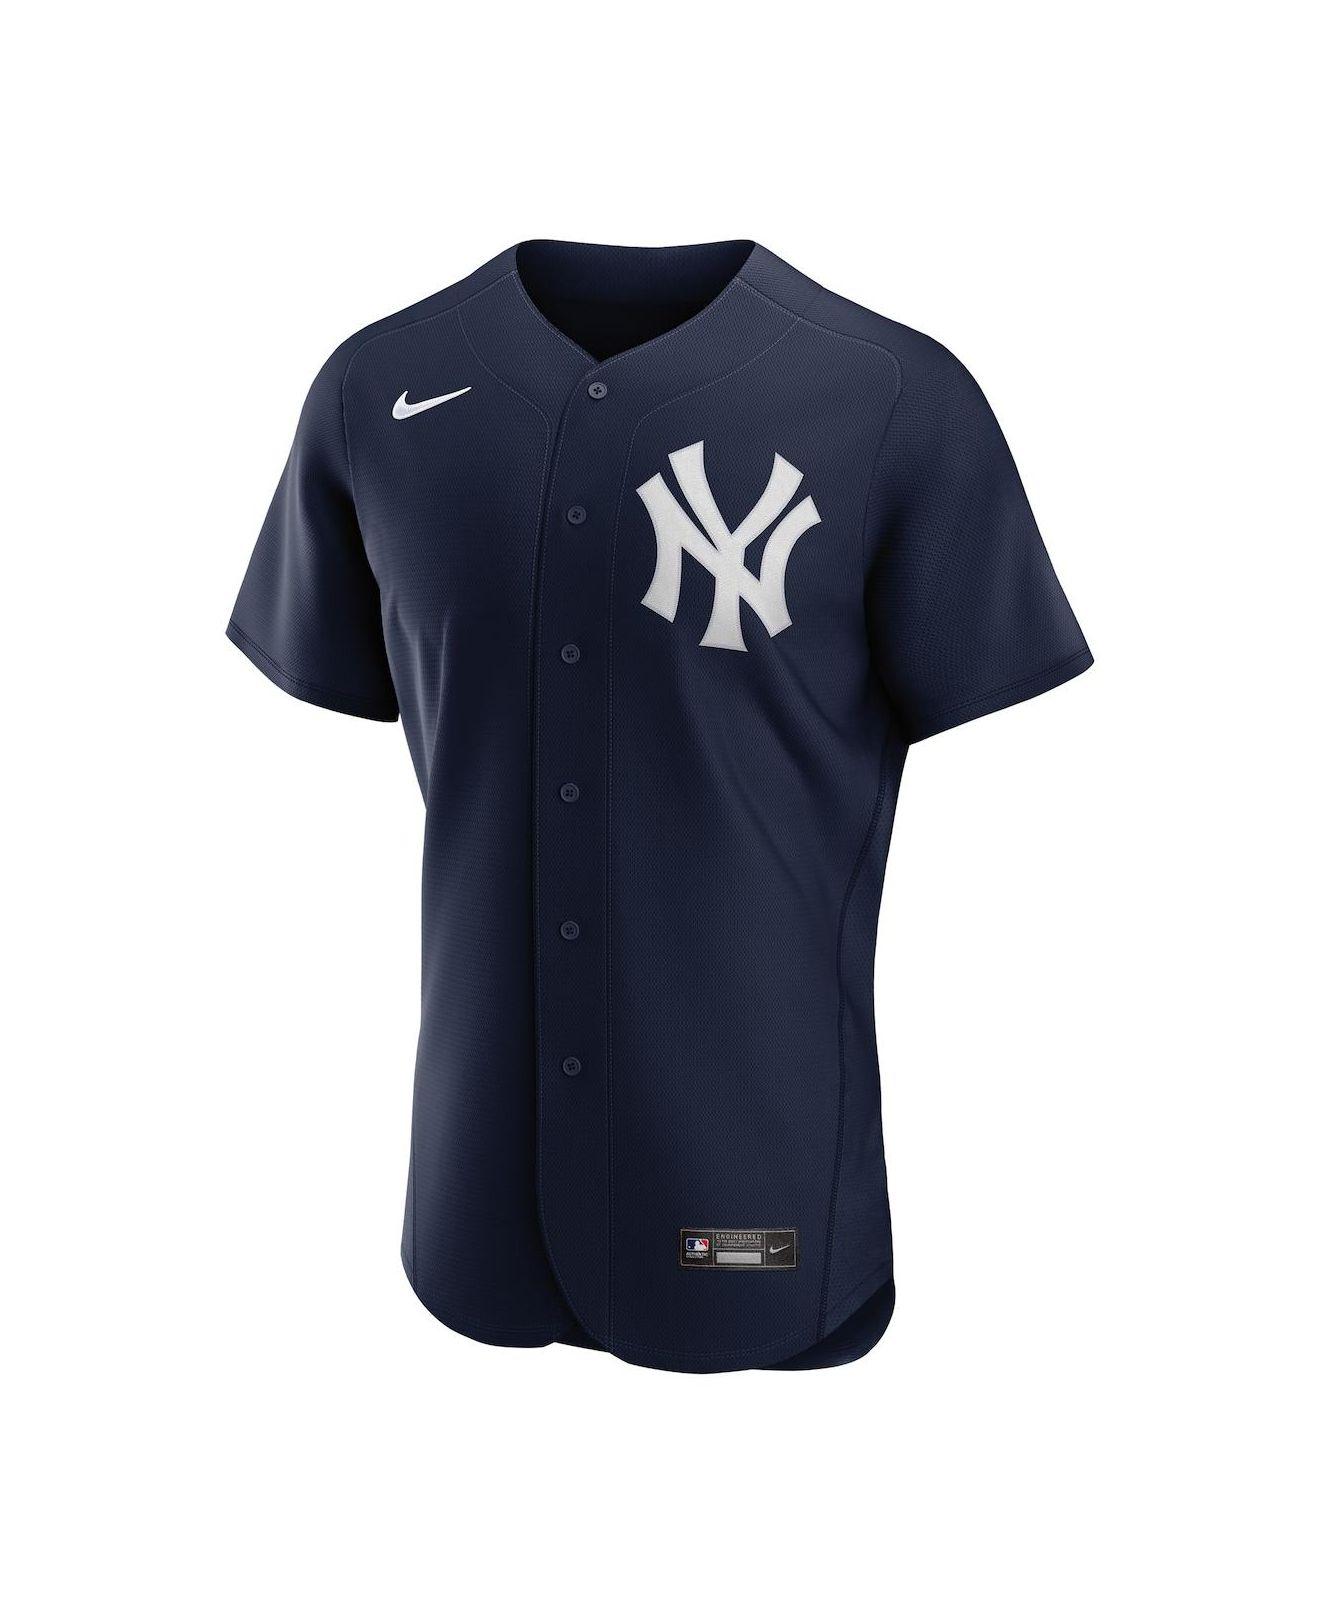 New York Yankees Mlb Nike Official Replica Road Jerseydugout Grey